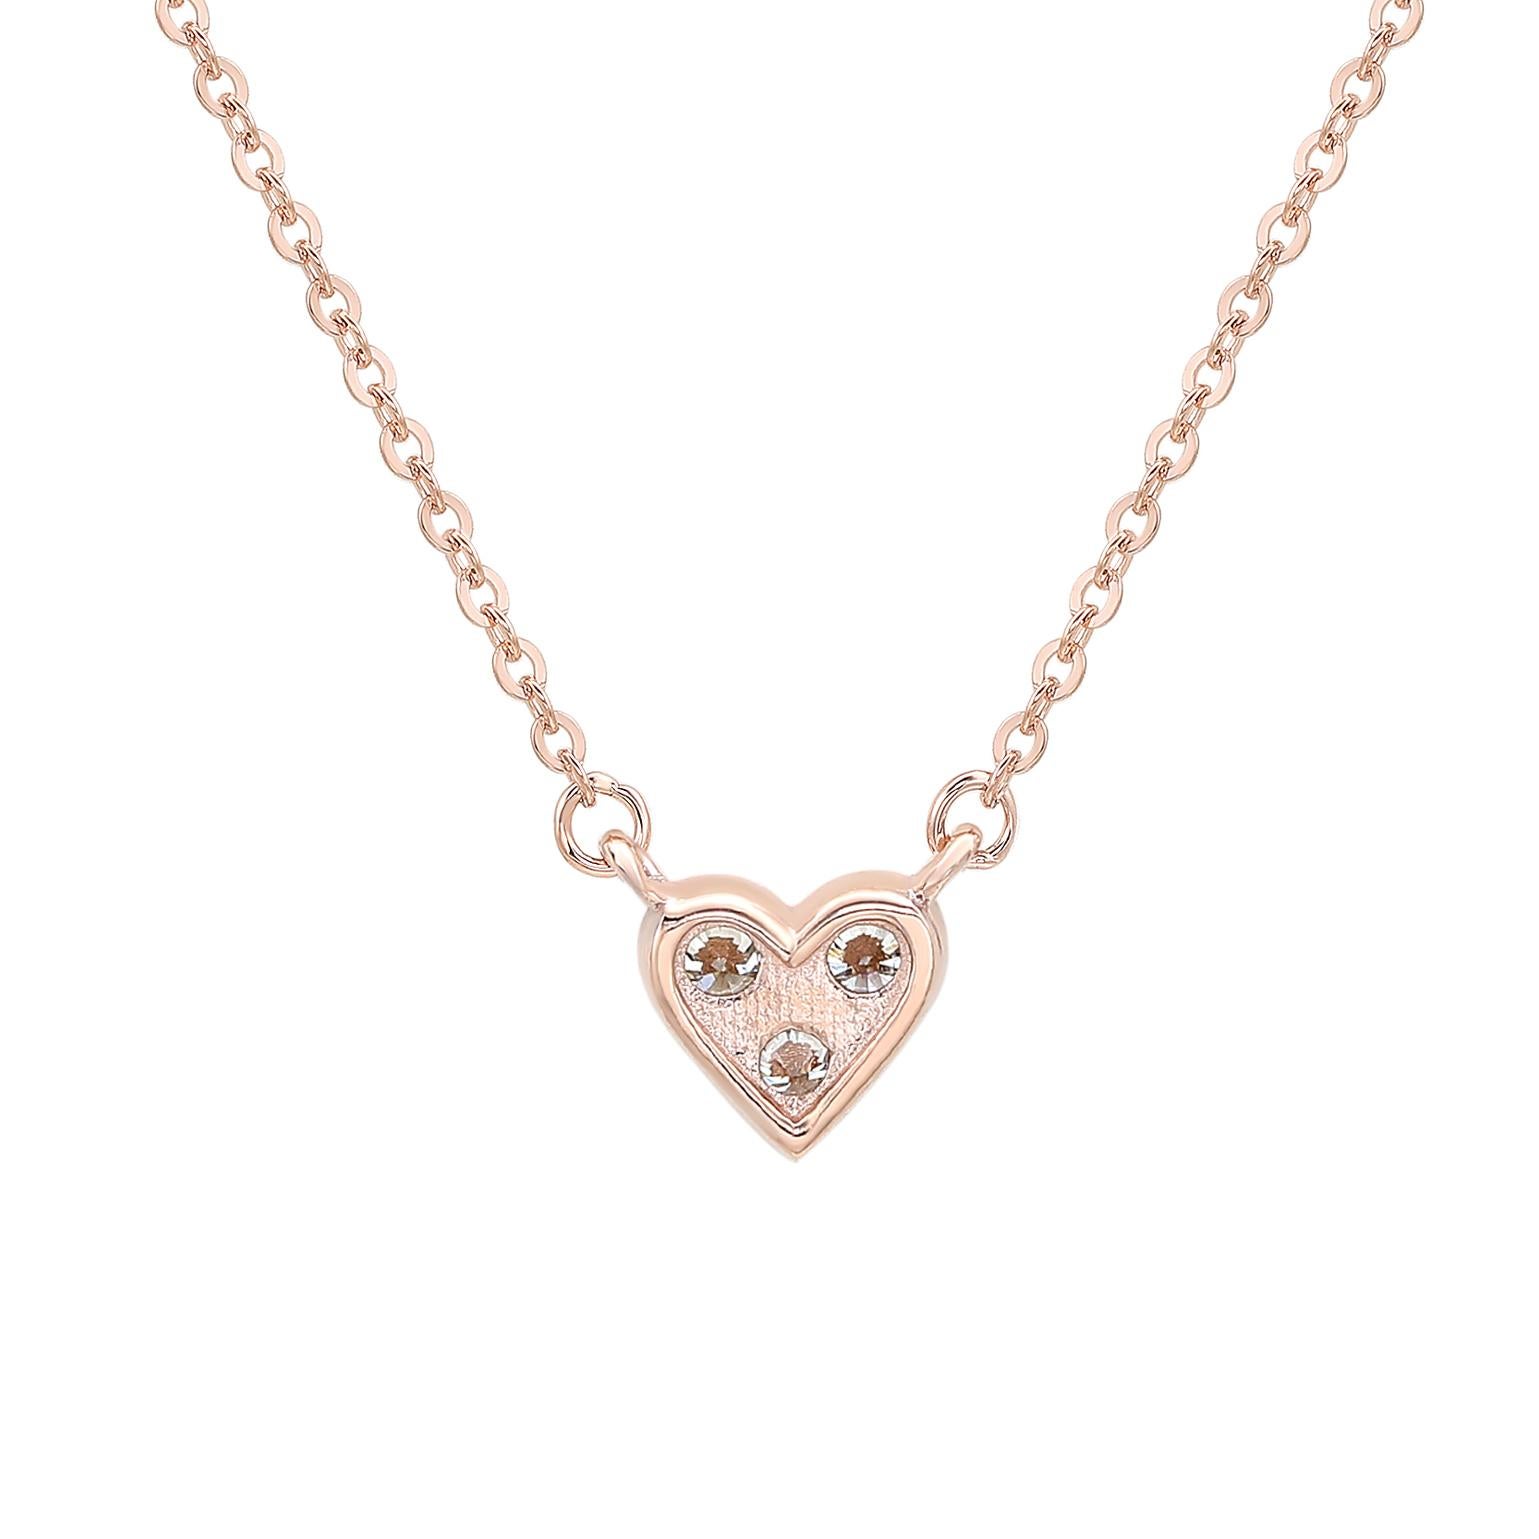 Add an elegant accent to your outfit with this sparkling Suzy Levian heart shape necklace featuring 3 round cut gorgeous white diamonds in a prong setting. The sparkling diamonds are hand set in 14-karat rose gold, and weigh 0.18 cttw and are g-h,